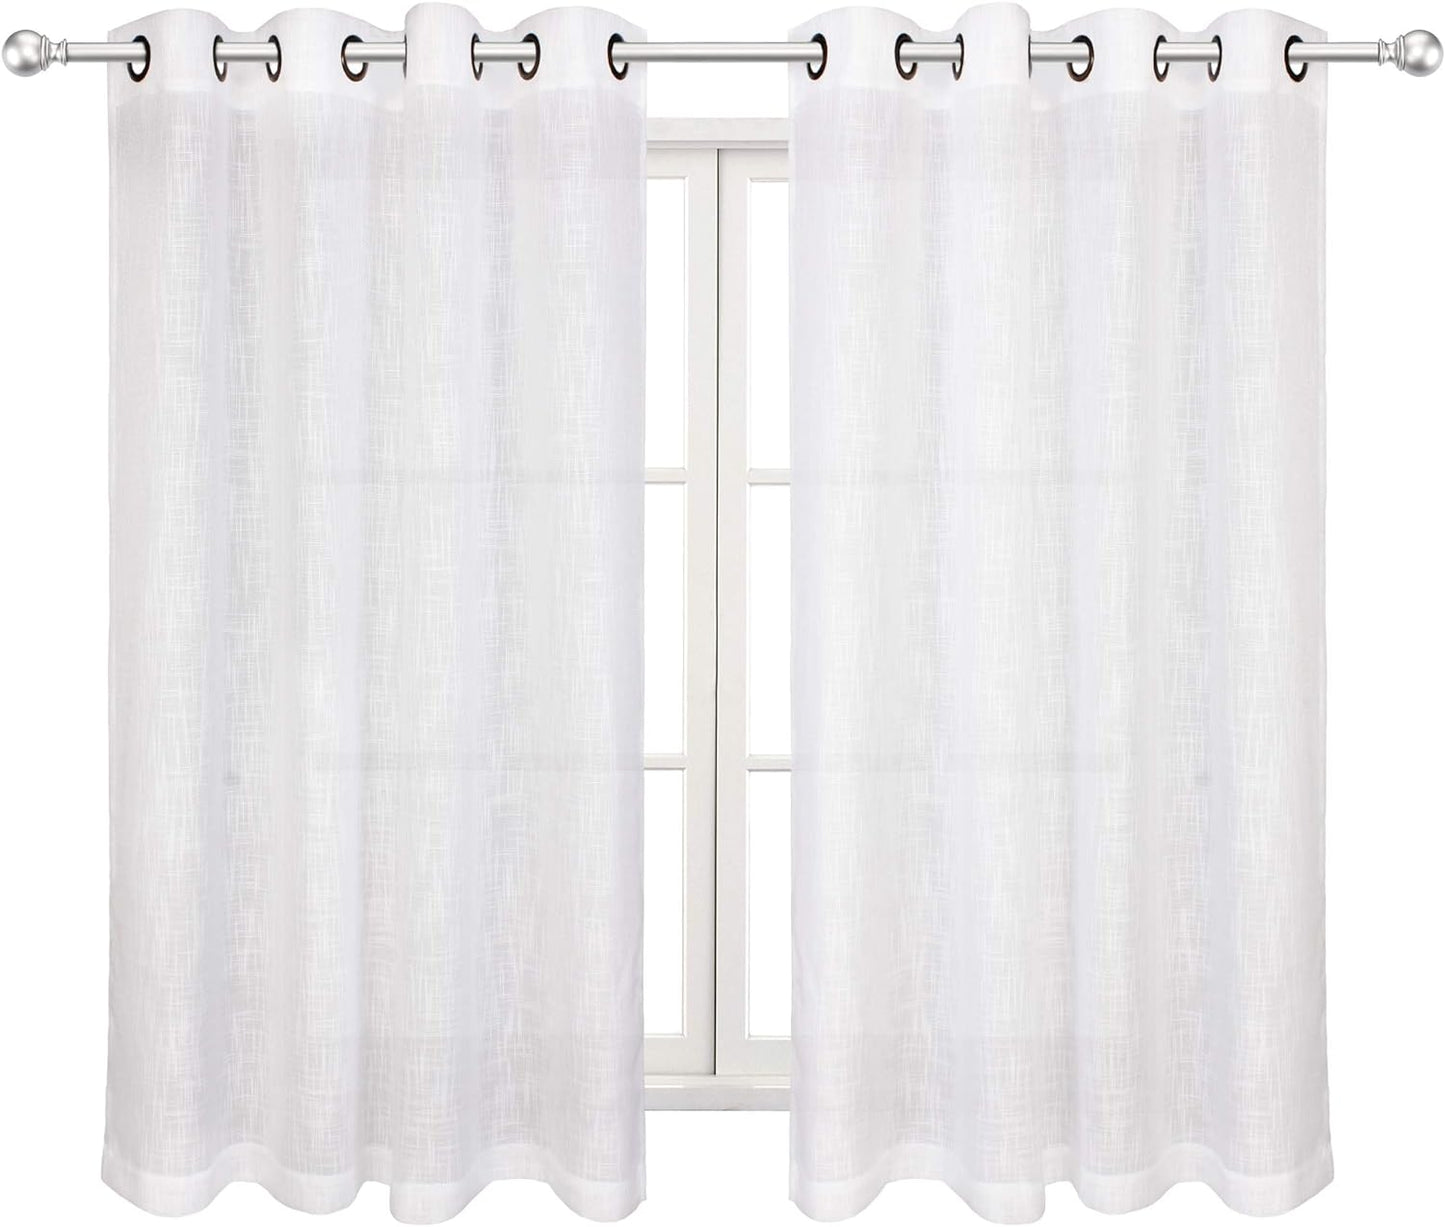 VOILYBIRD Palma Light Filtering Drapes Natural Linen Blended Semi Sheer Curtains 84 Inches Long Bronze Grommet for Bedroom (Natural, 52" W X 84" L, 2 Panels)  VOILYBIRD White 52"W X 45"L 